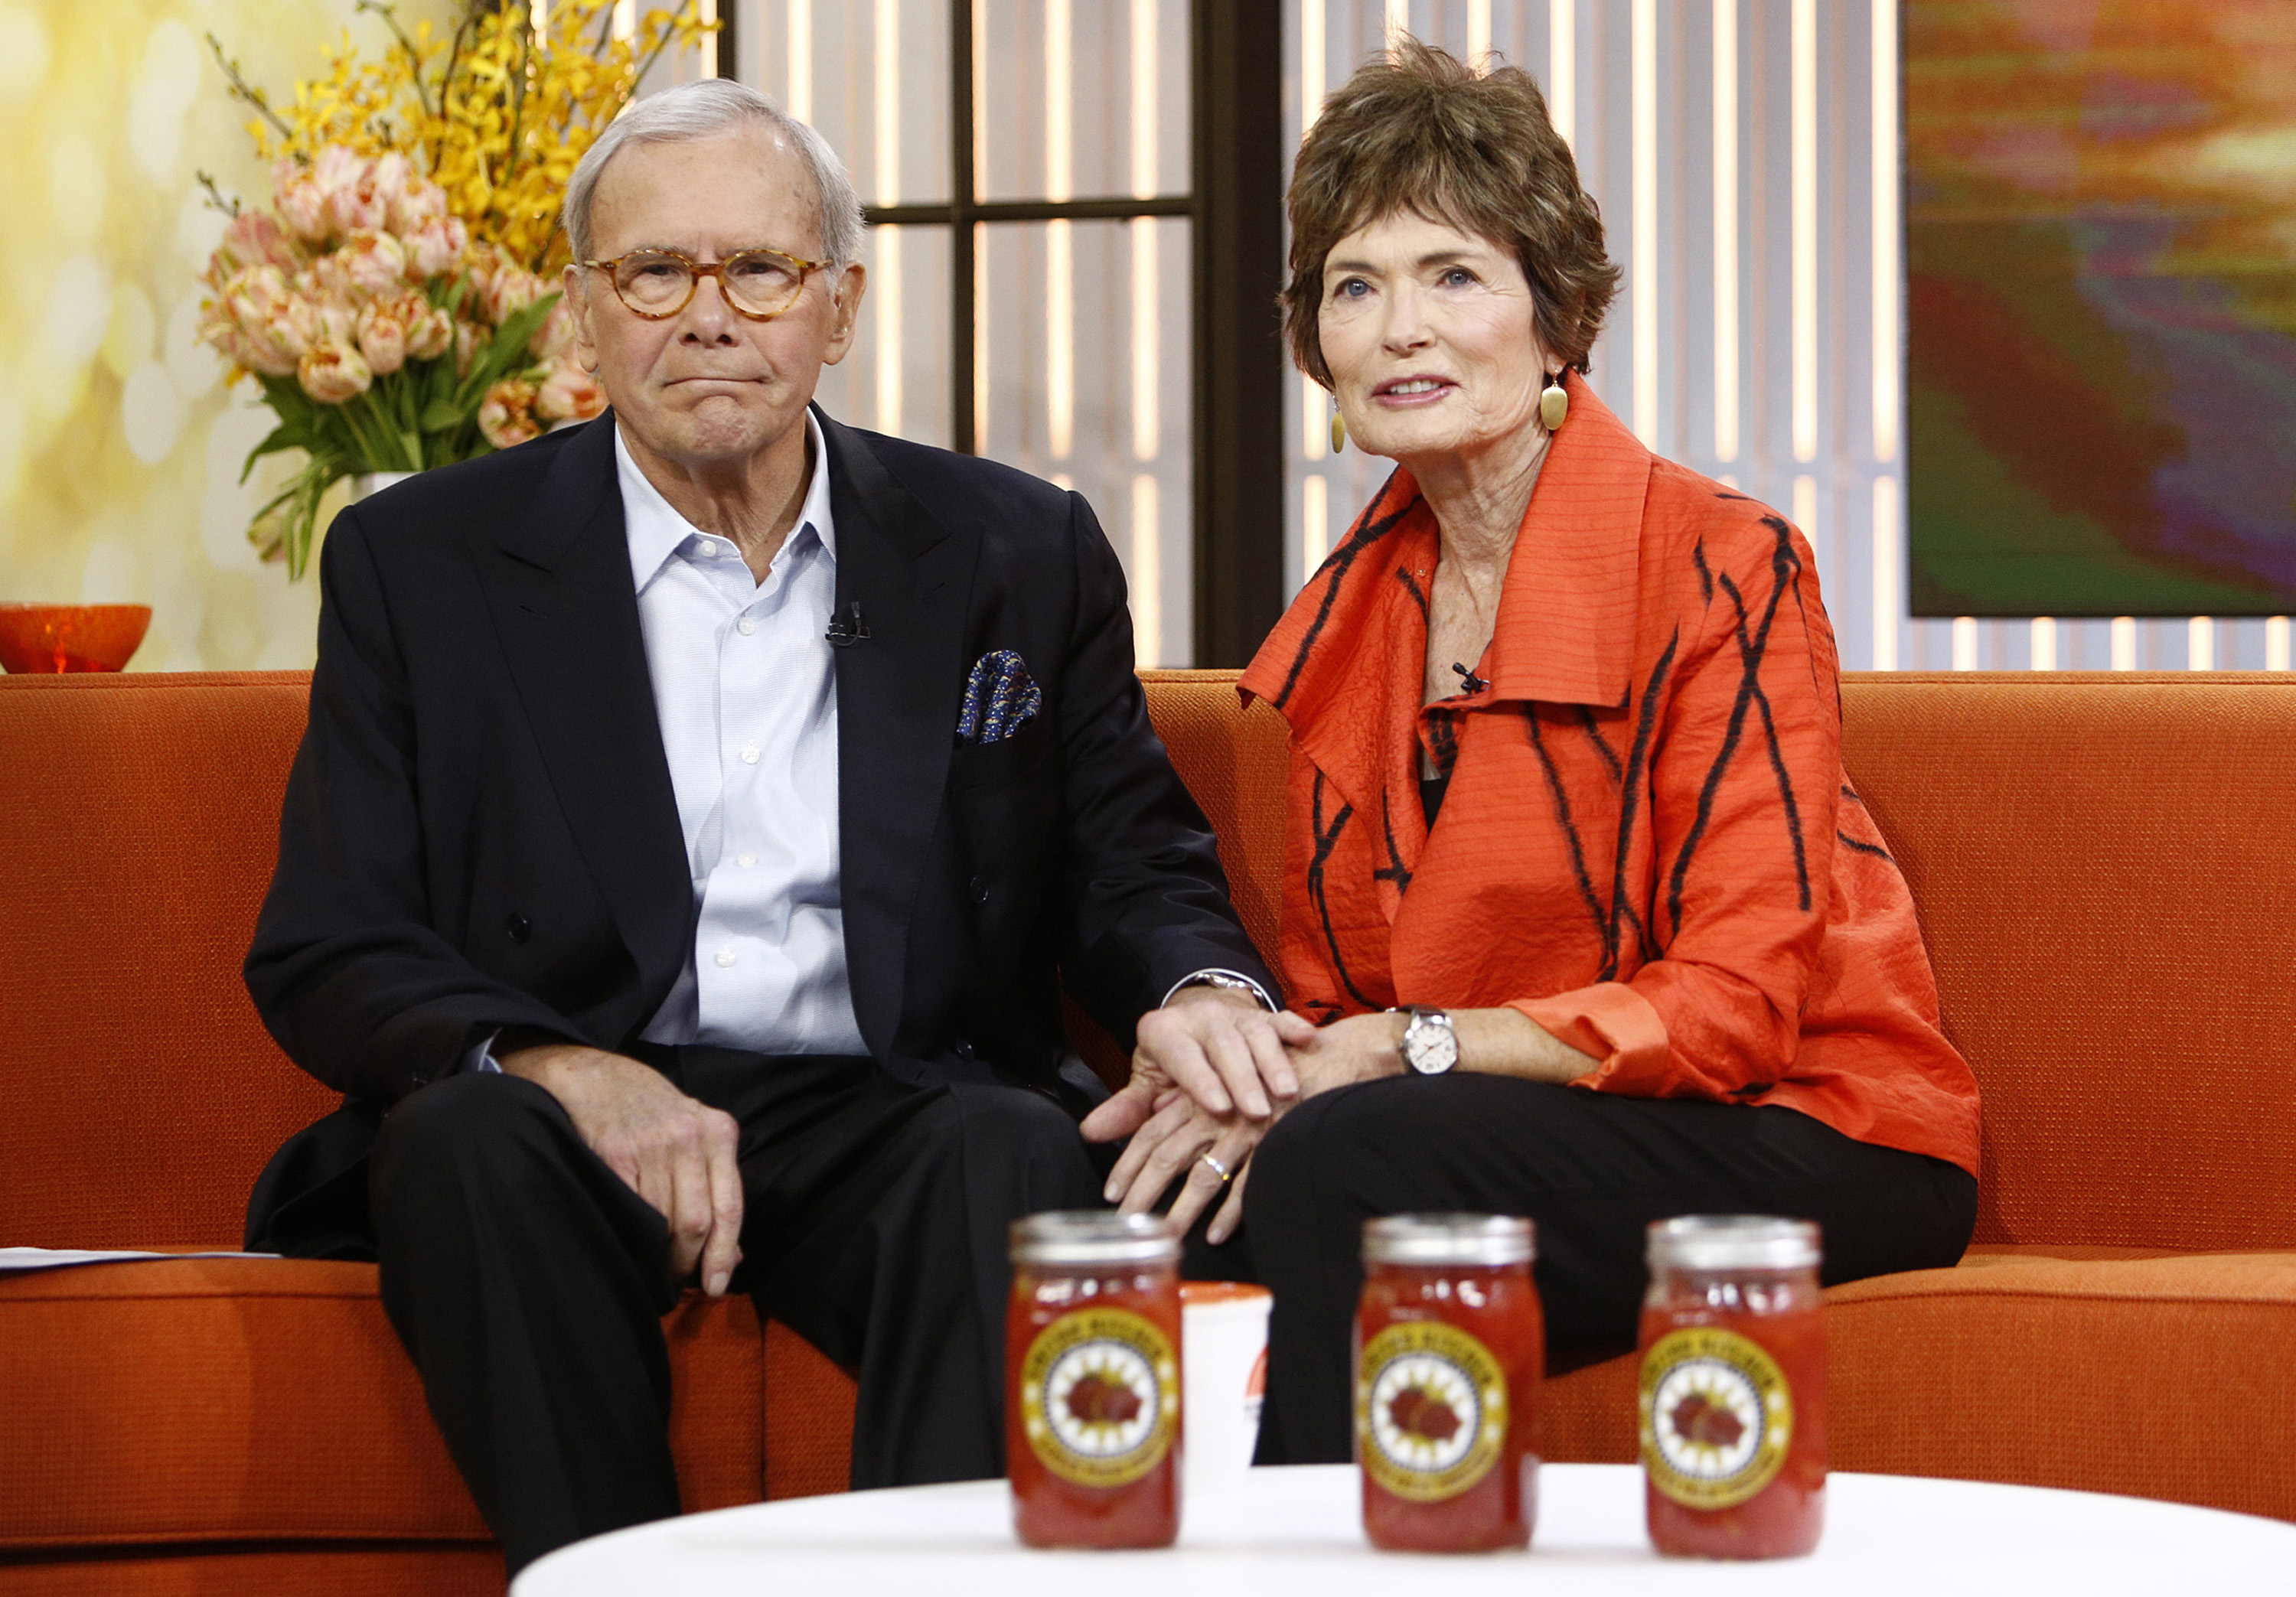 Tom Brokaw and Meredith Auld on the "Today" show on September 17, 2013 | Source: Getty Images